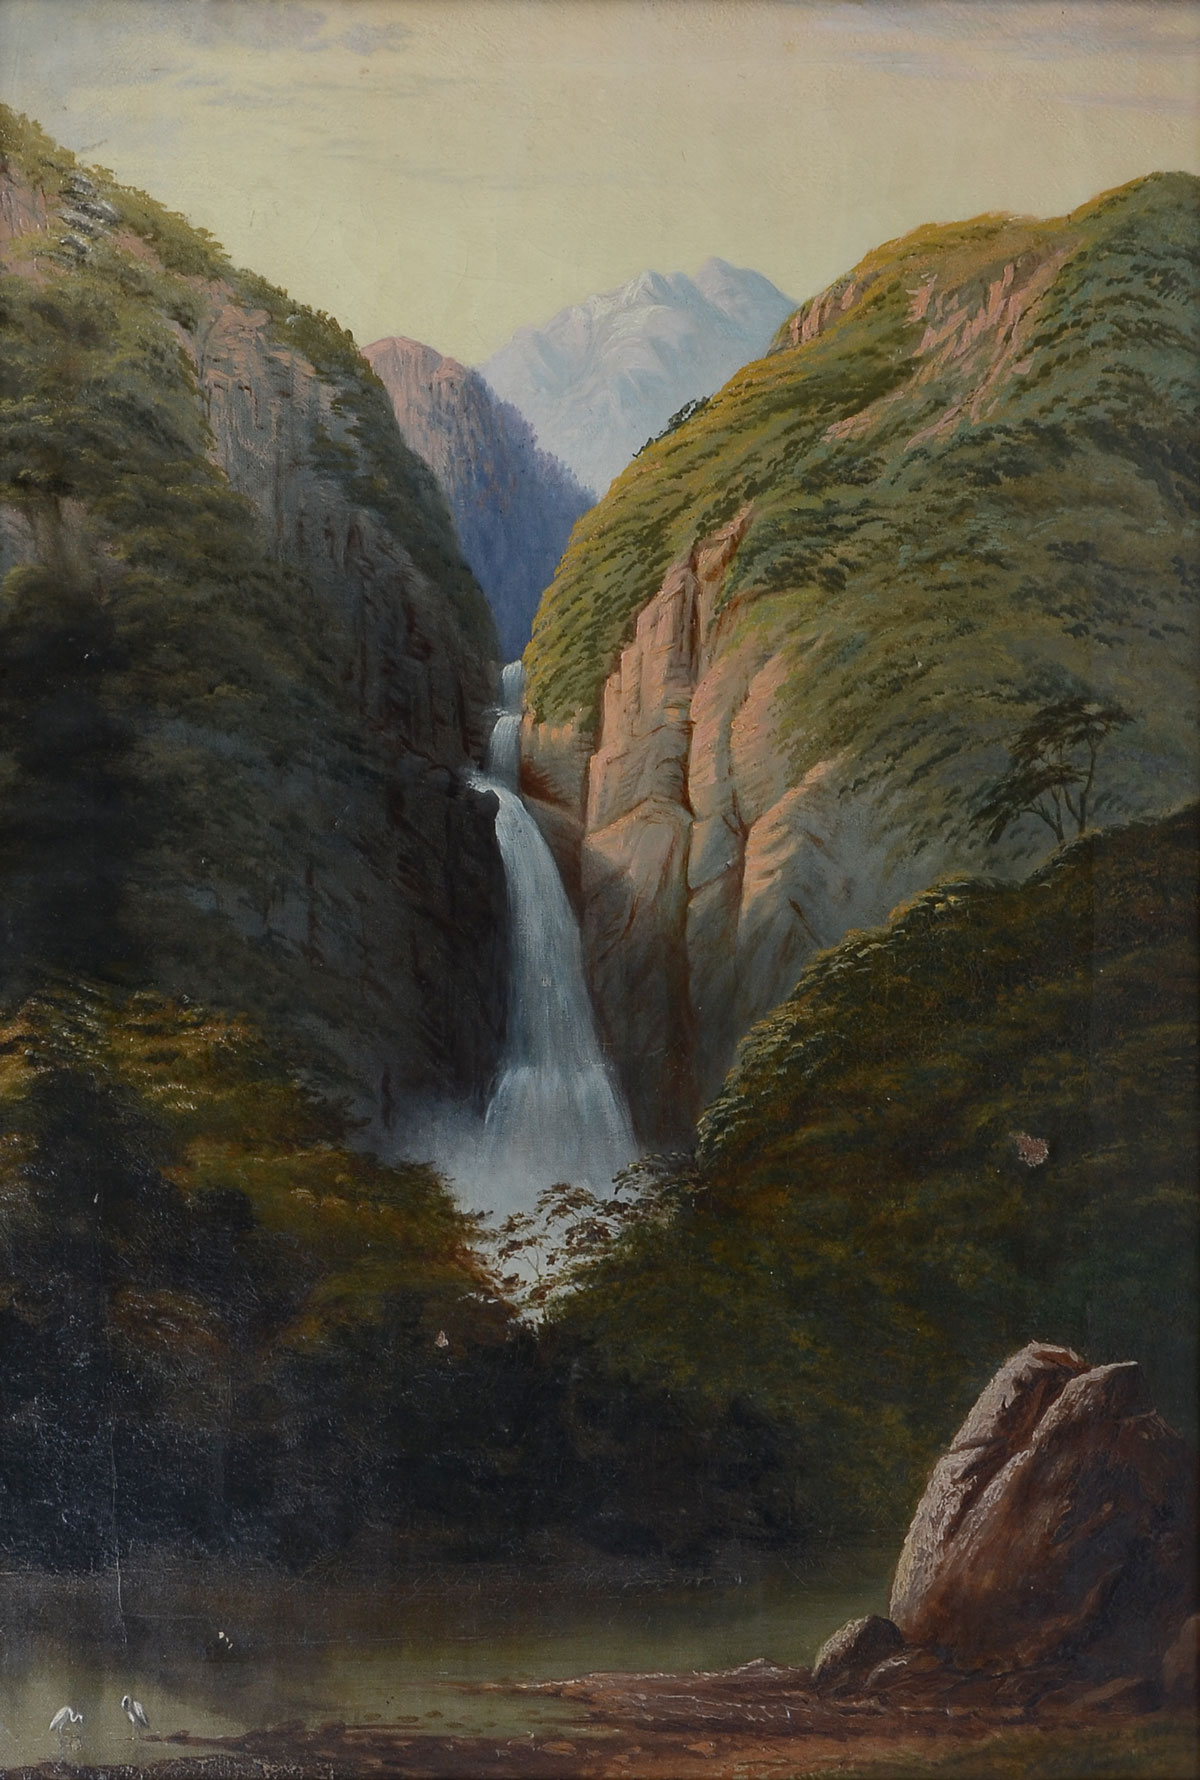 DEVIL'S PUNCHBOWL PAINTING 19TH